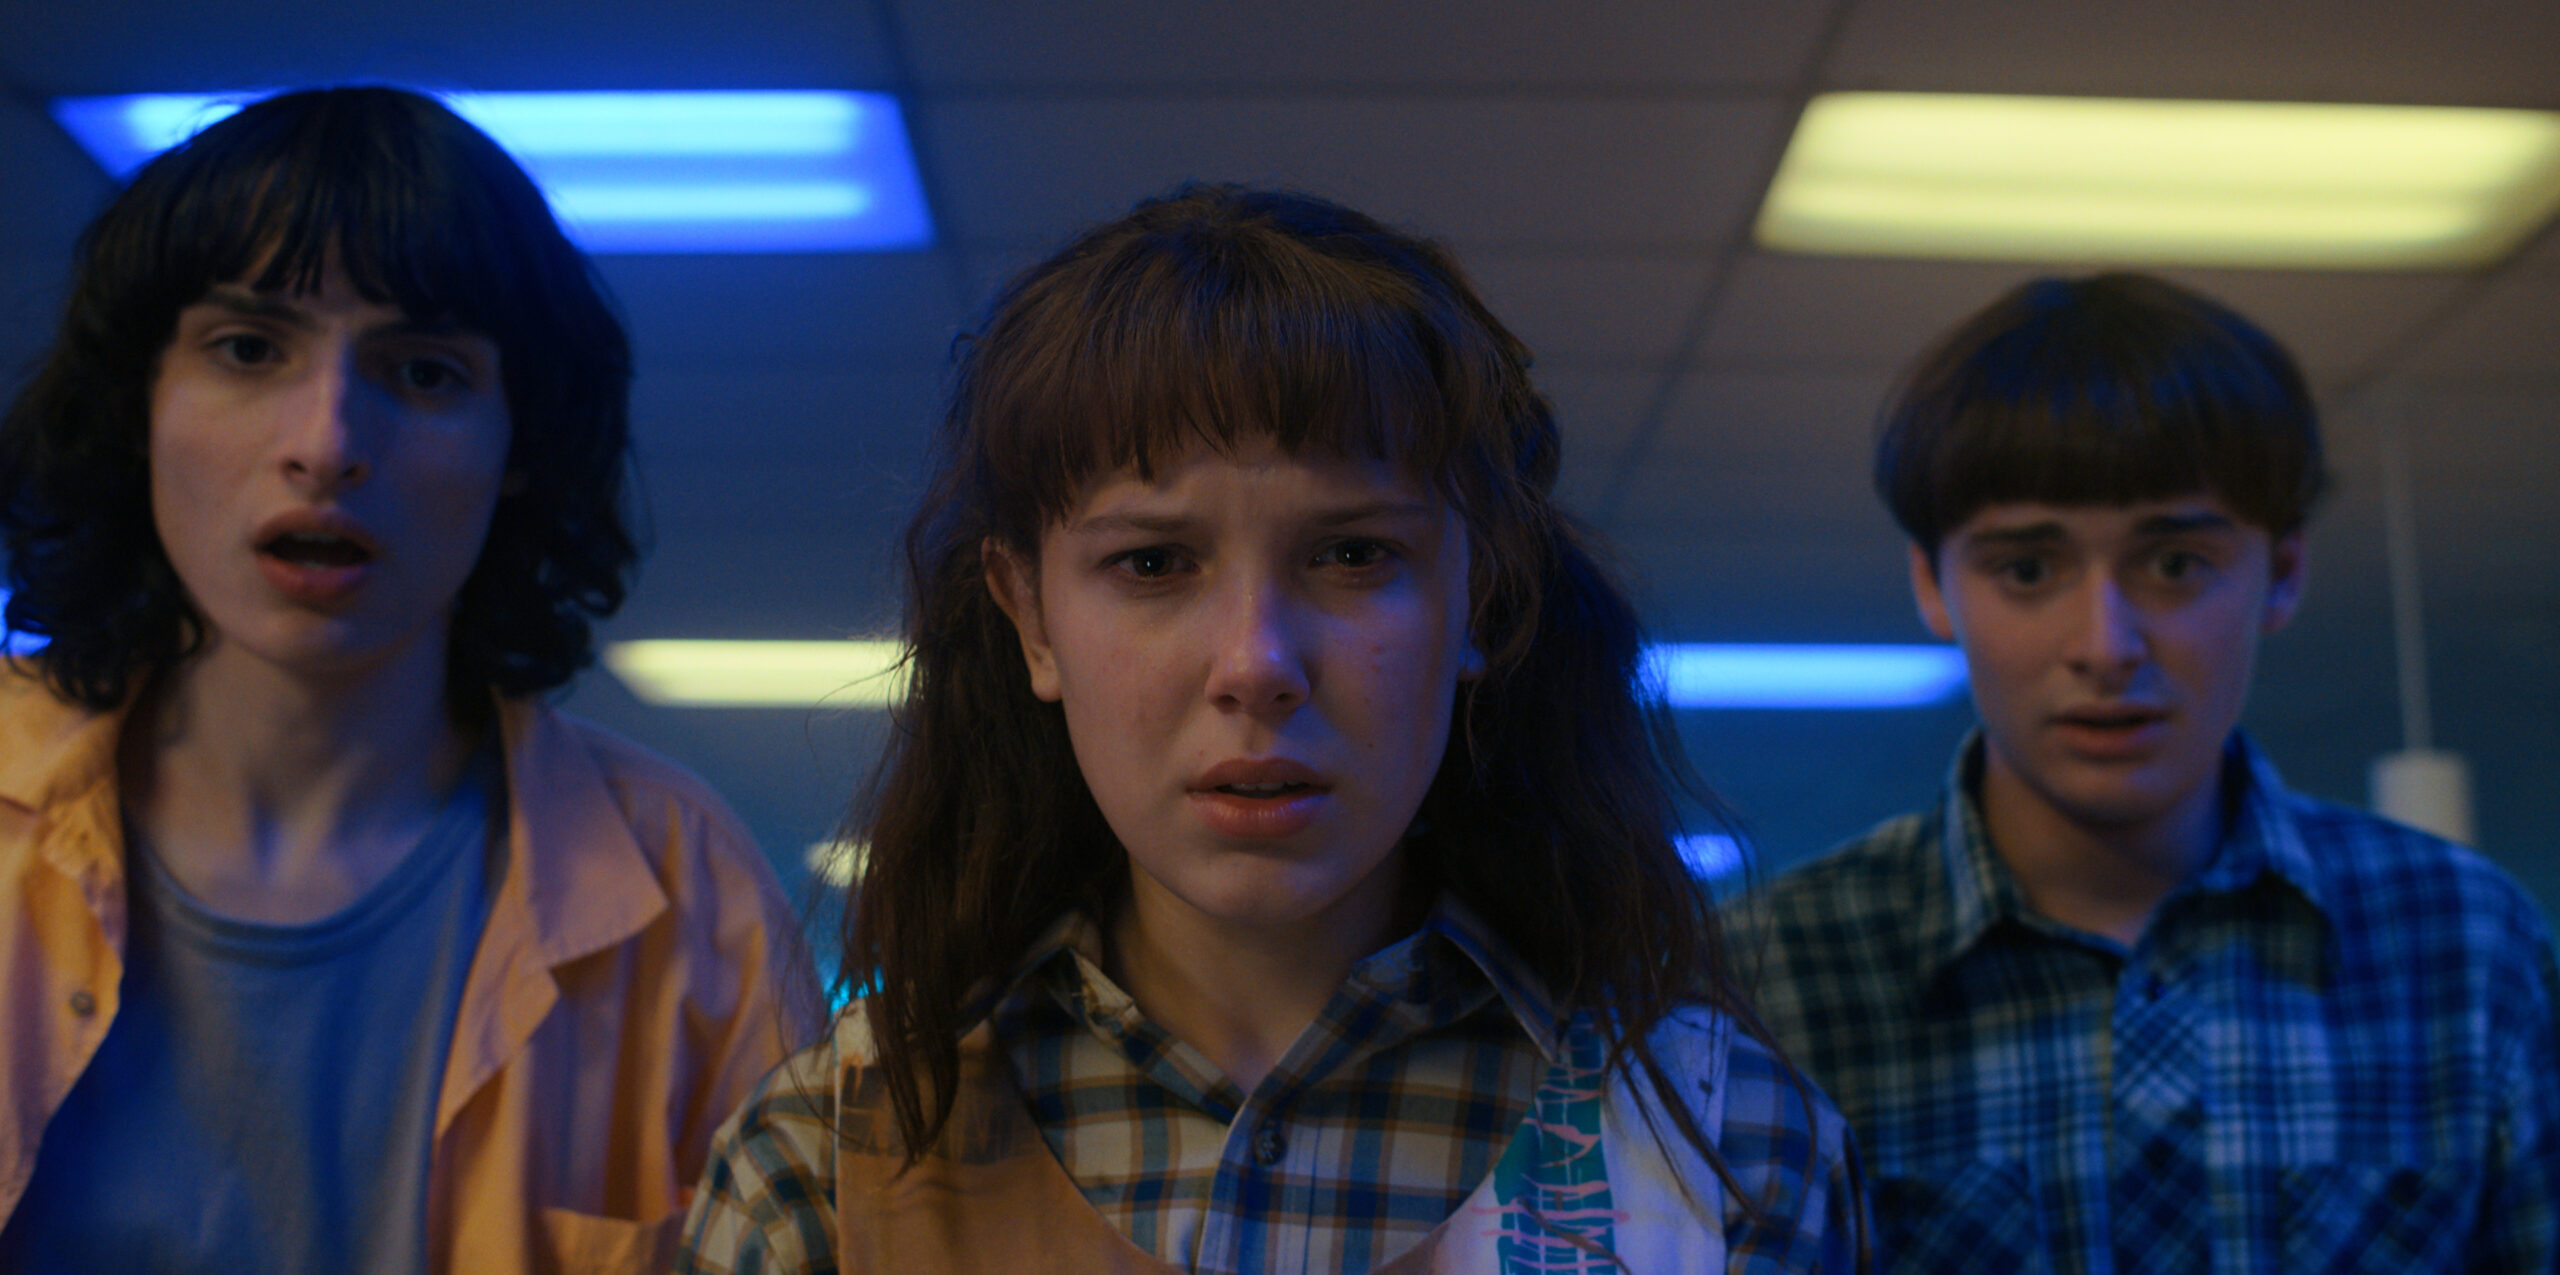 Duffer Brothers And Netflix Set ‘Stranger Things’ Stage Play, Plus ‘Death Note’ And ‘The Talisman’ Adaptations